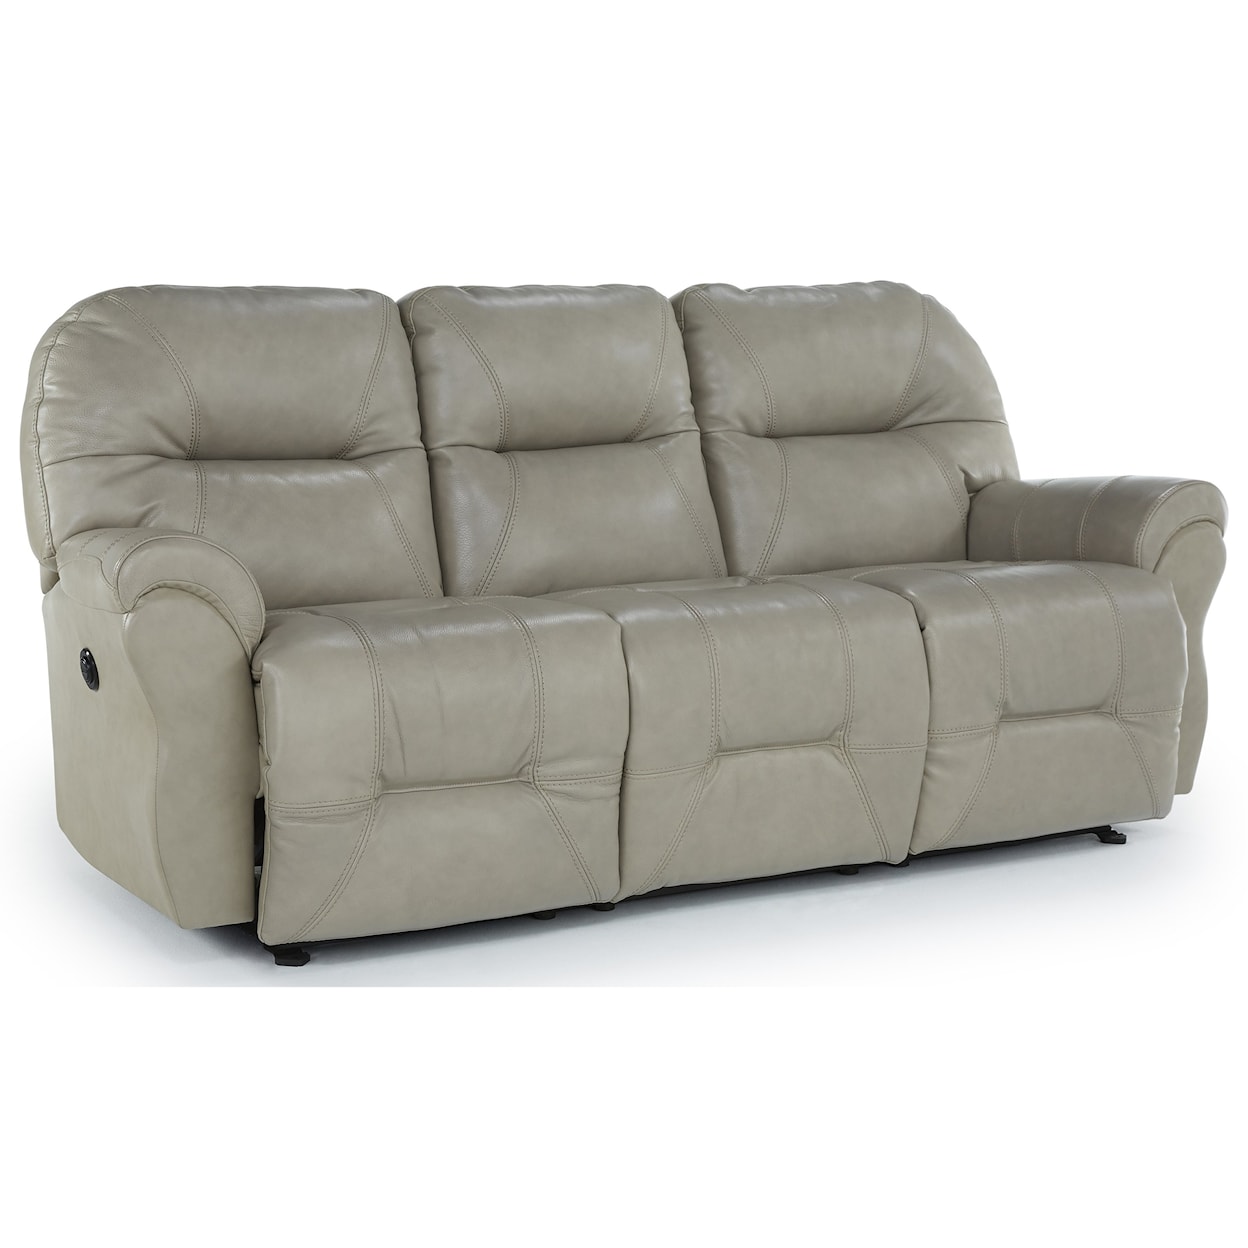 Best Home Furnishings Allure Collection Power Reclining Sofa